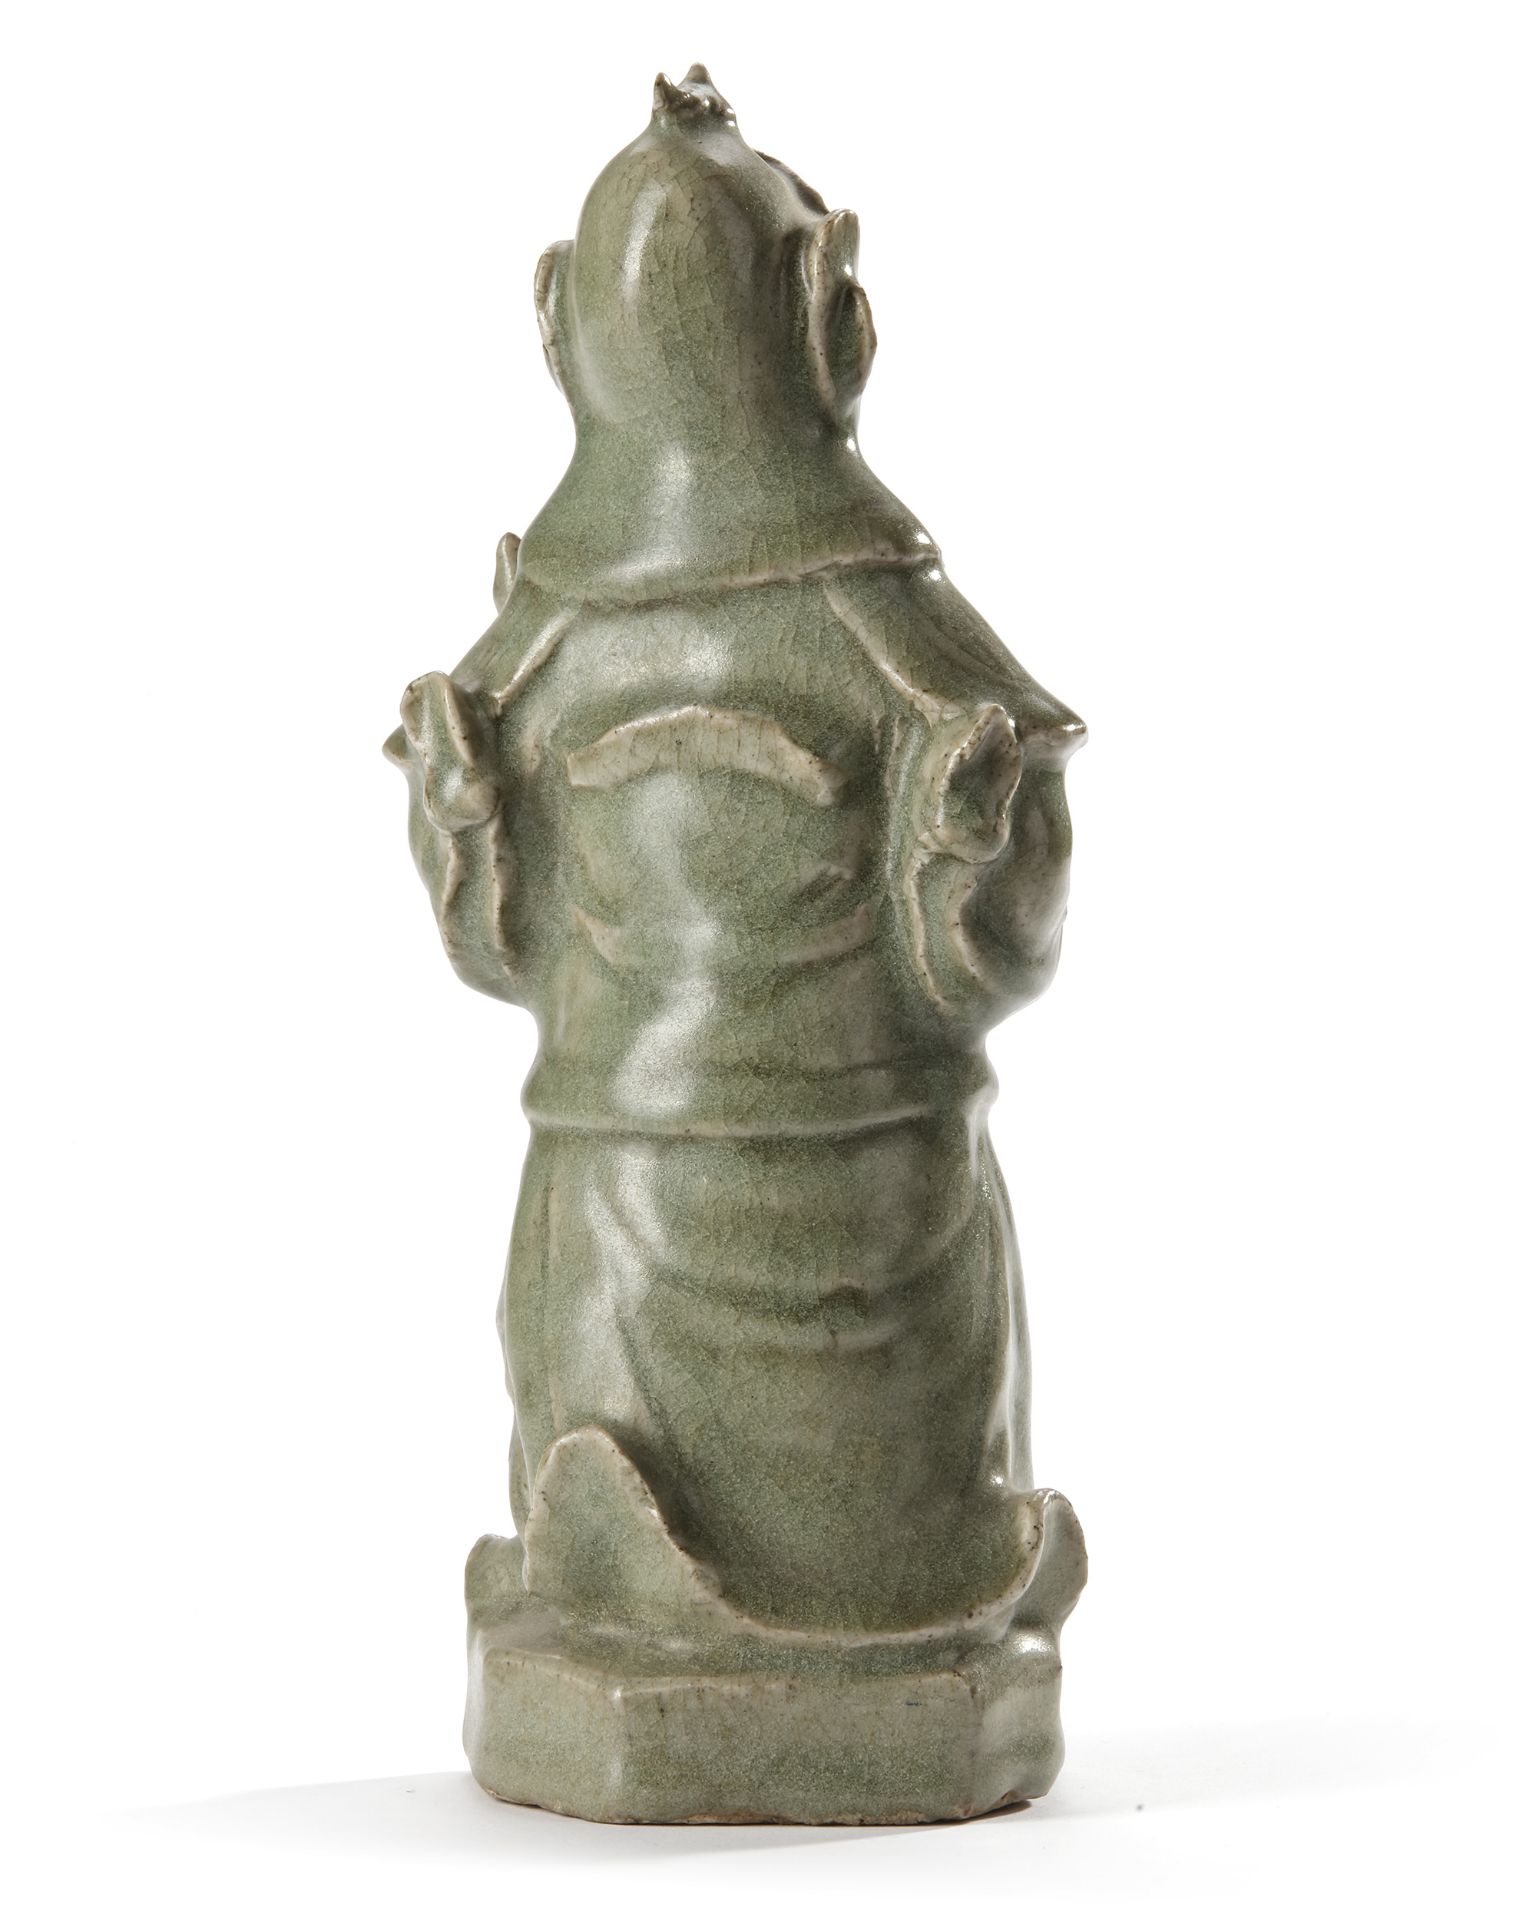 A CHINESE CELADON GUAN YU FIGURE, MING DYNASTY, 15TH CENTURY - Image 4 of 6